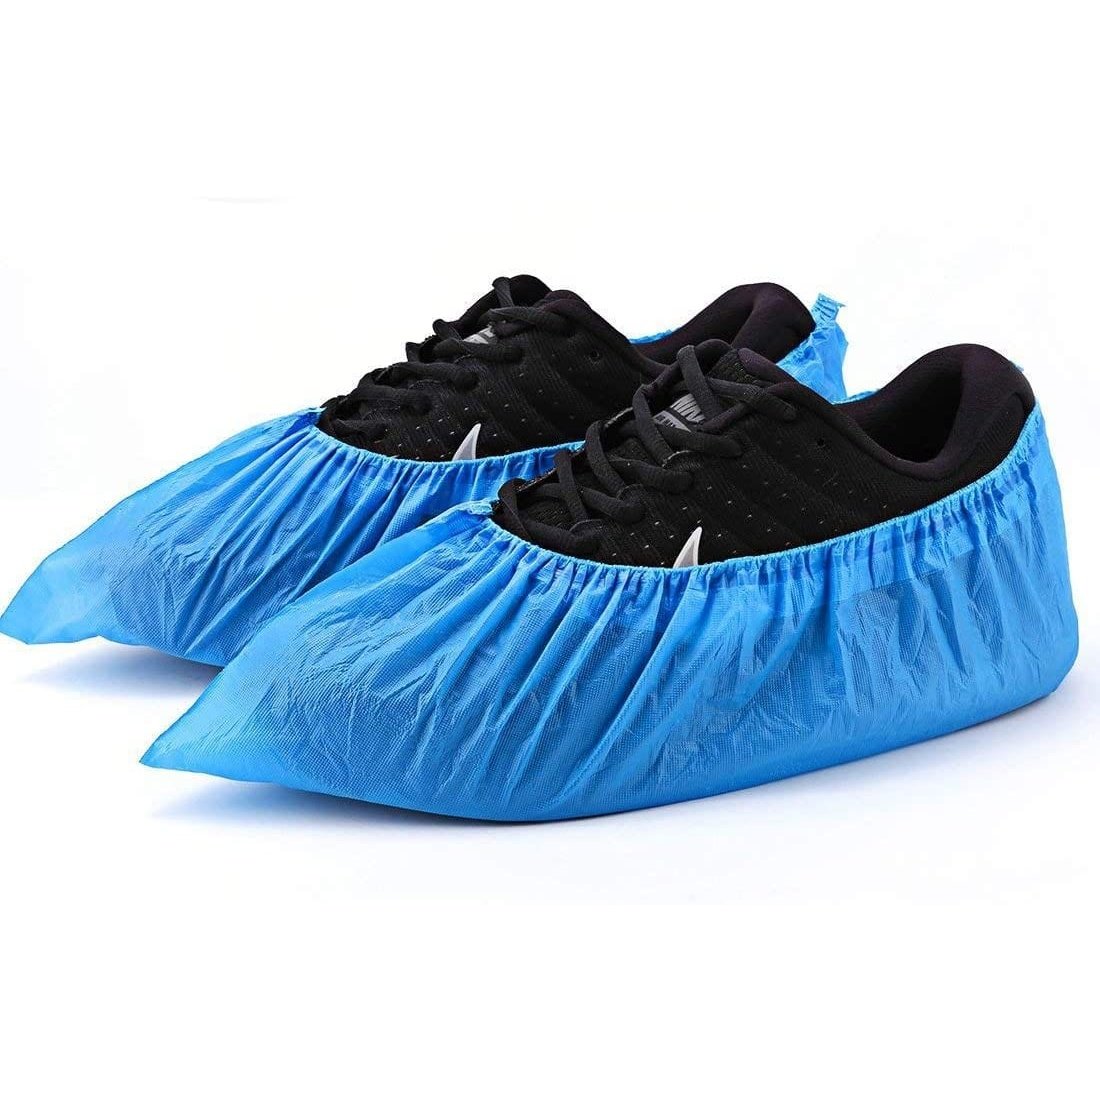 Waterproof 100-pieces Blue Disposable Shoe Cover | Supply Master | Accra, Ghana Janitorial & Cleaning Buy Tools hardware Building materials